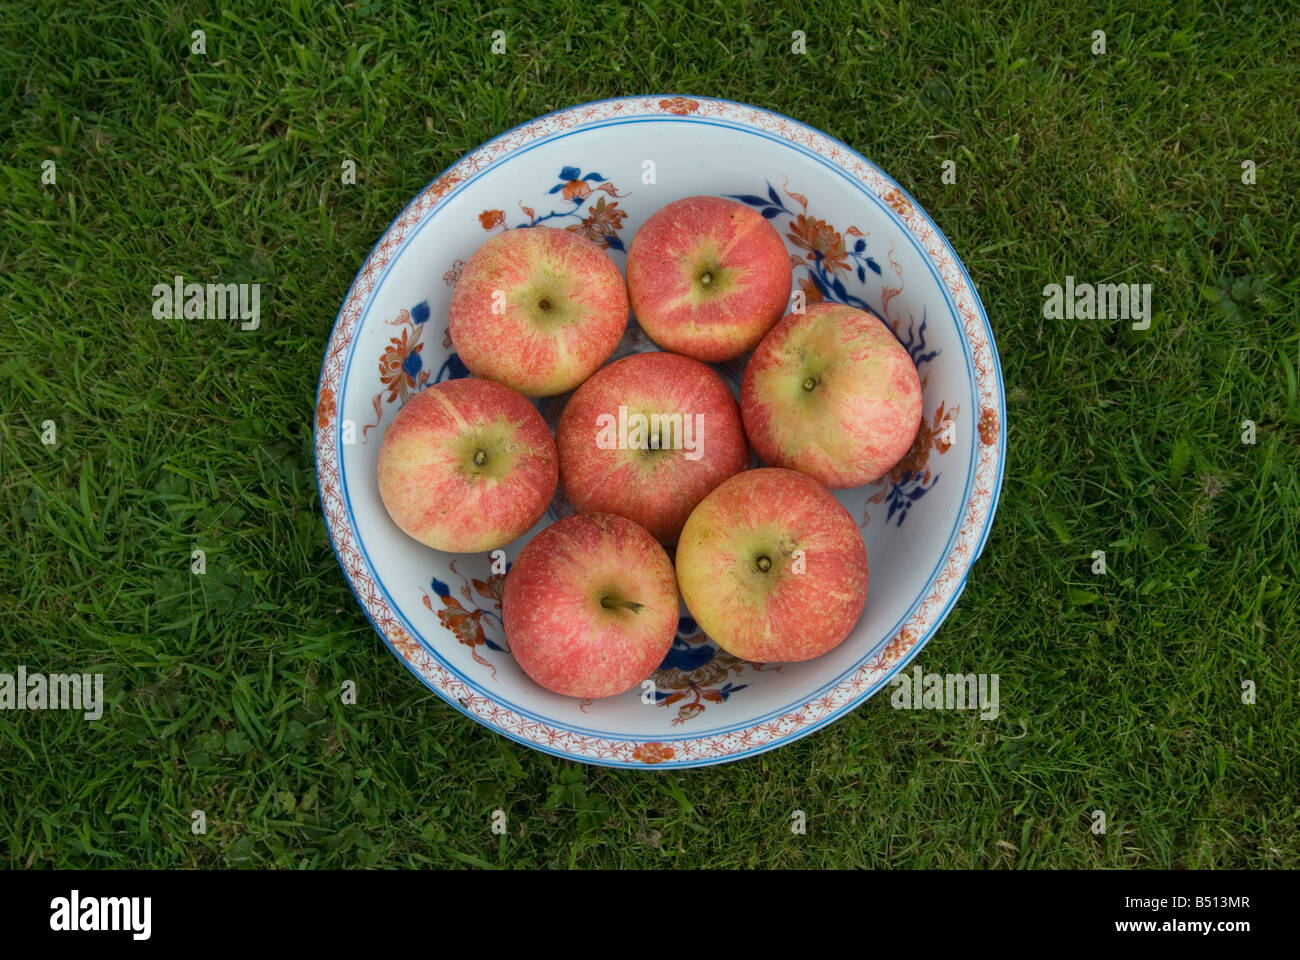 Beauty of Bath apples in old Chinese bowl on grass Stock Photo